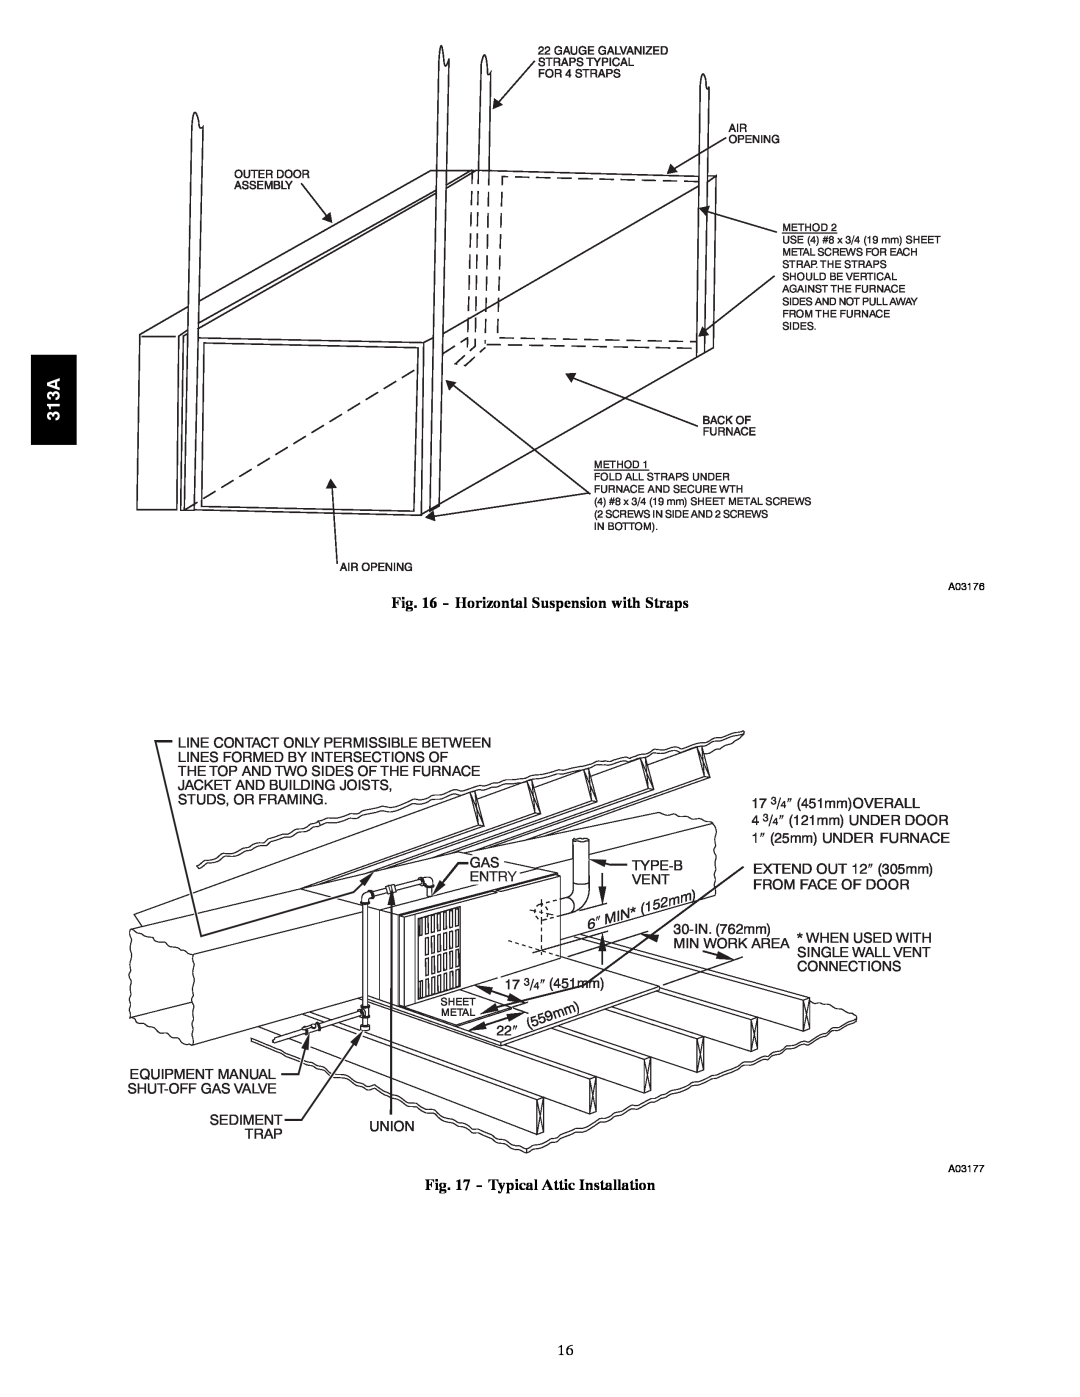 Bryant 313AAV instruction manual Horizontal Suspension with Straps, Typical Attic Installation 